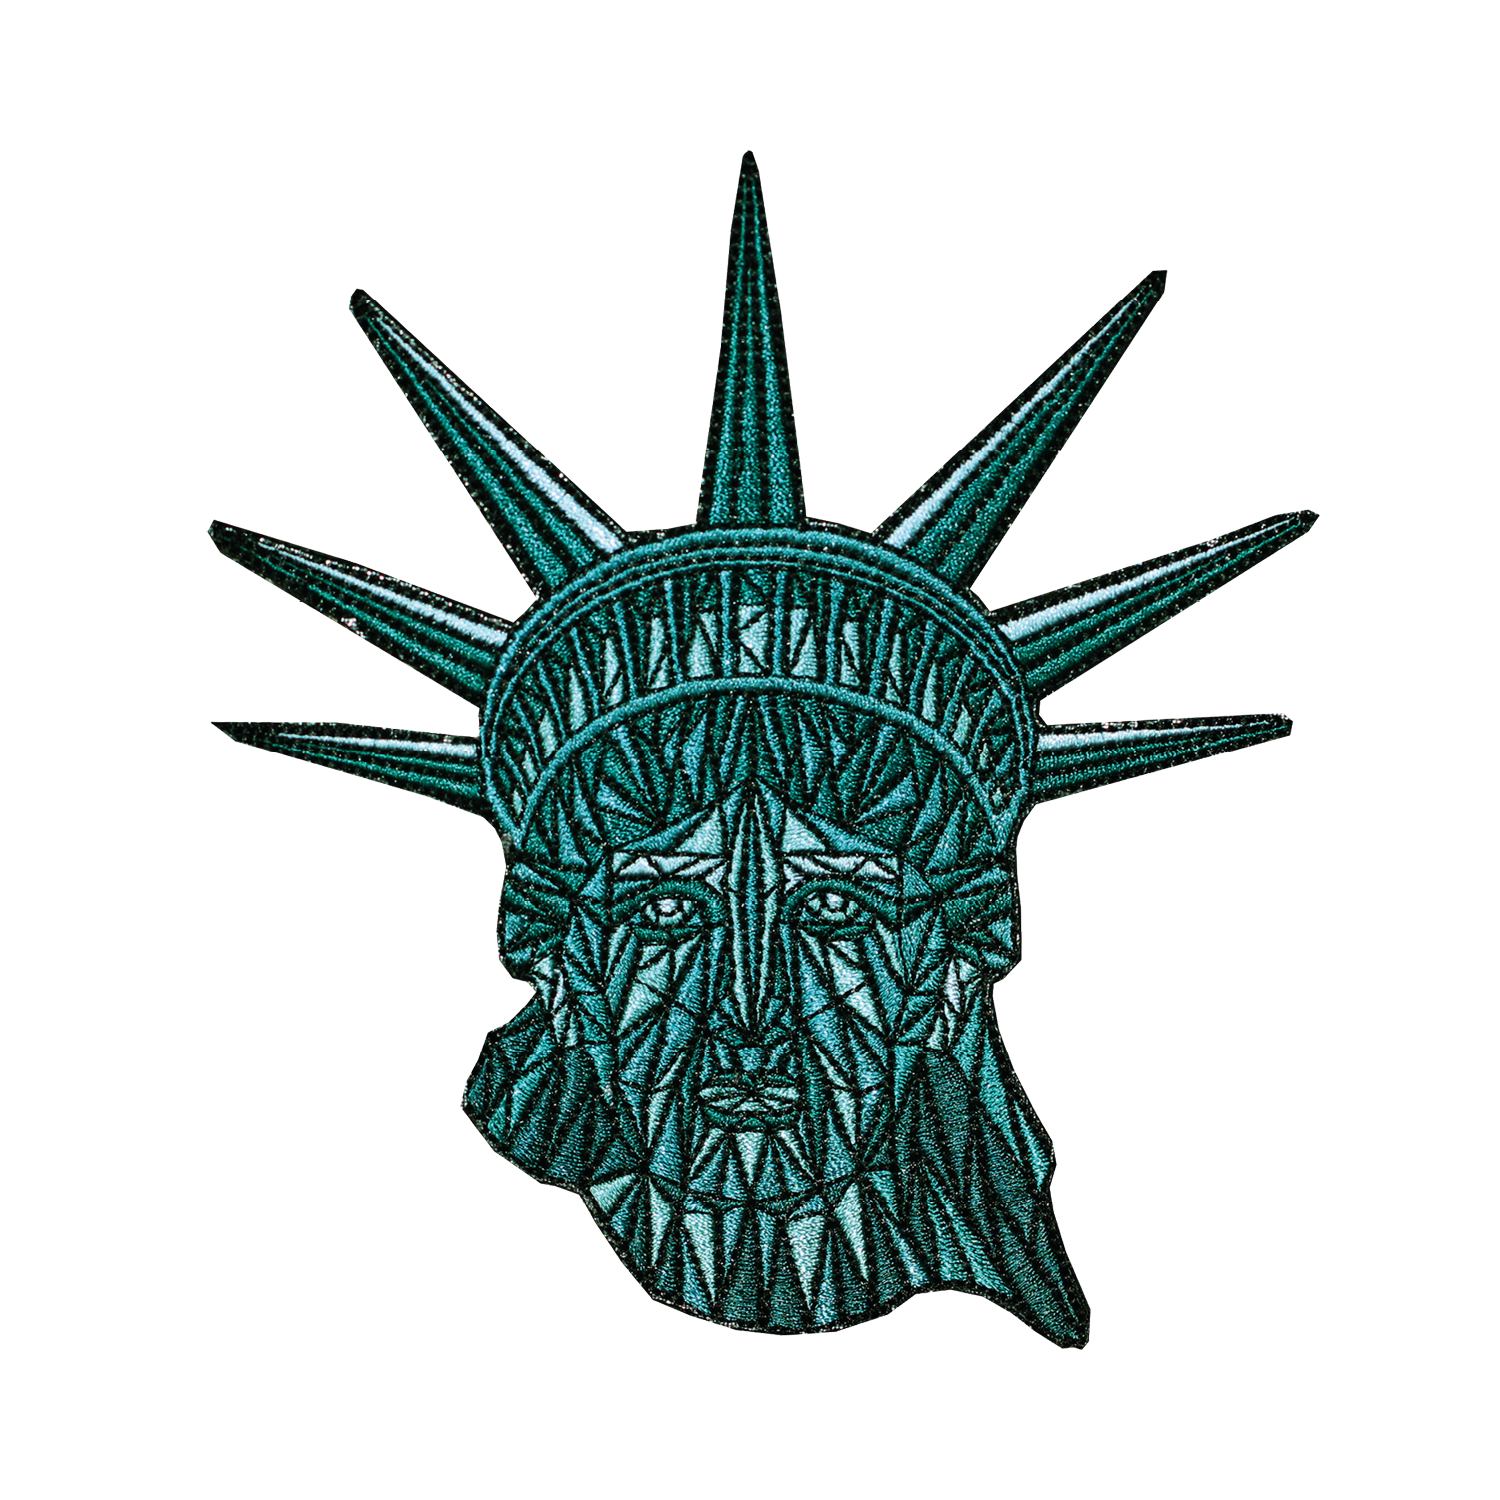 statue of liberty head outline